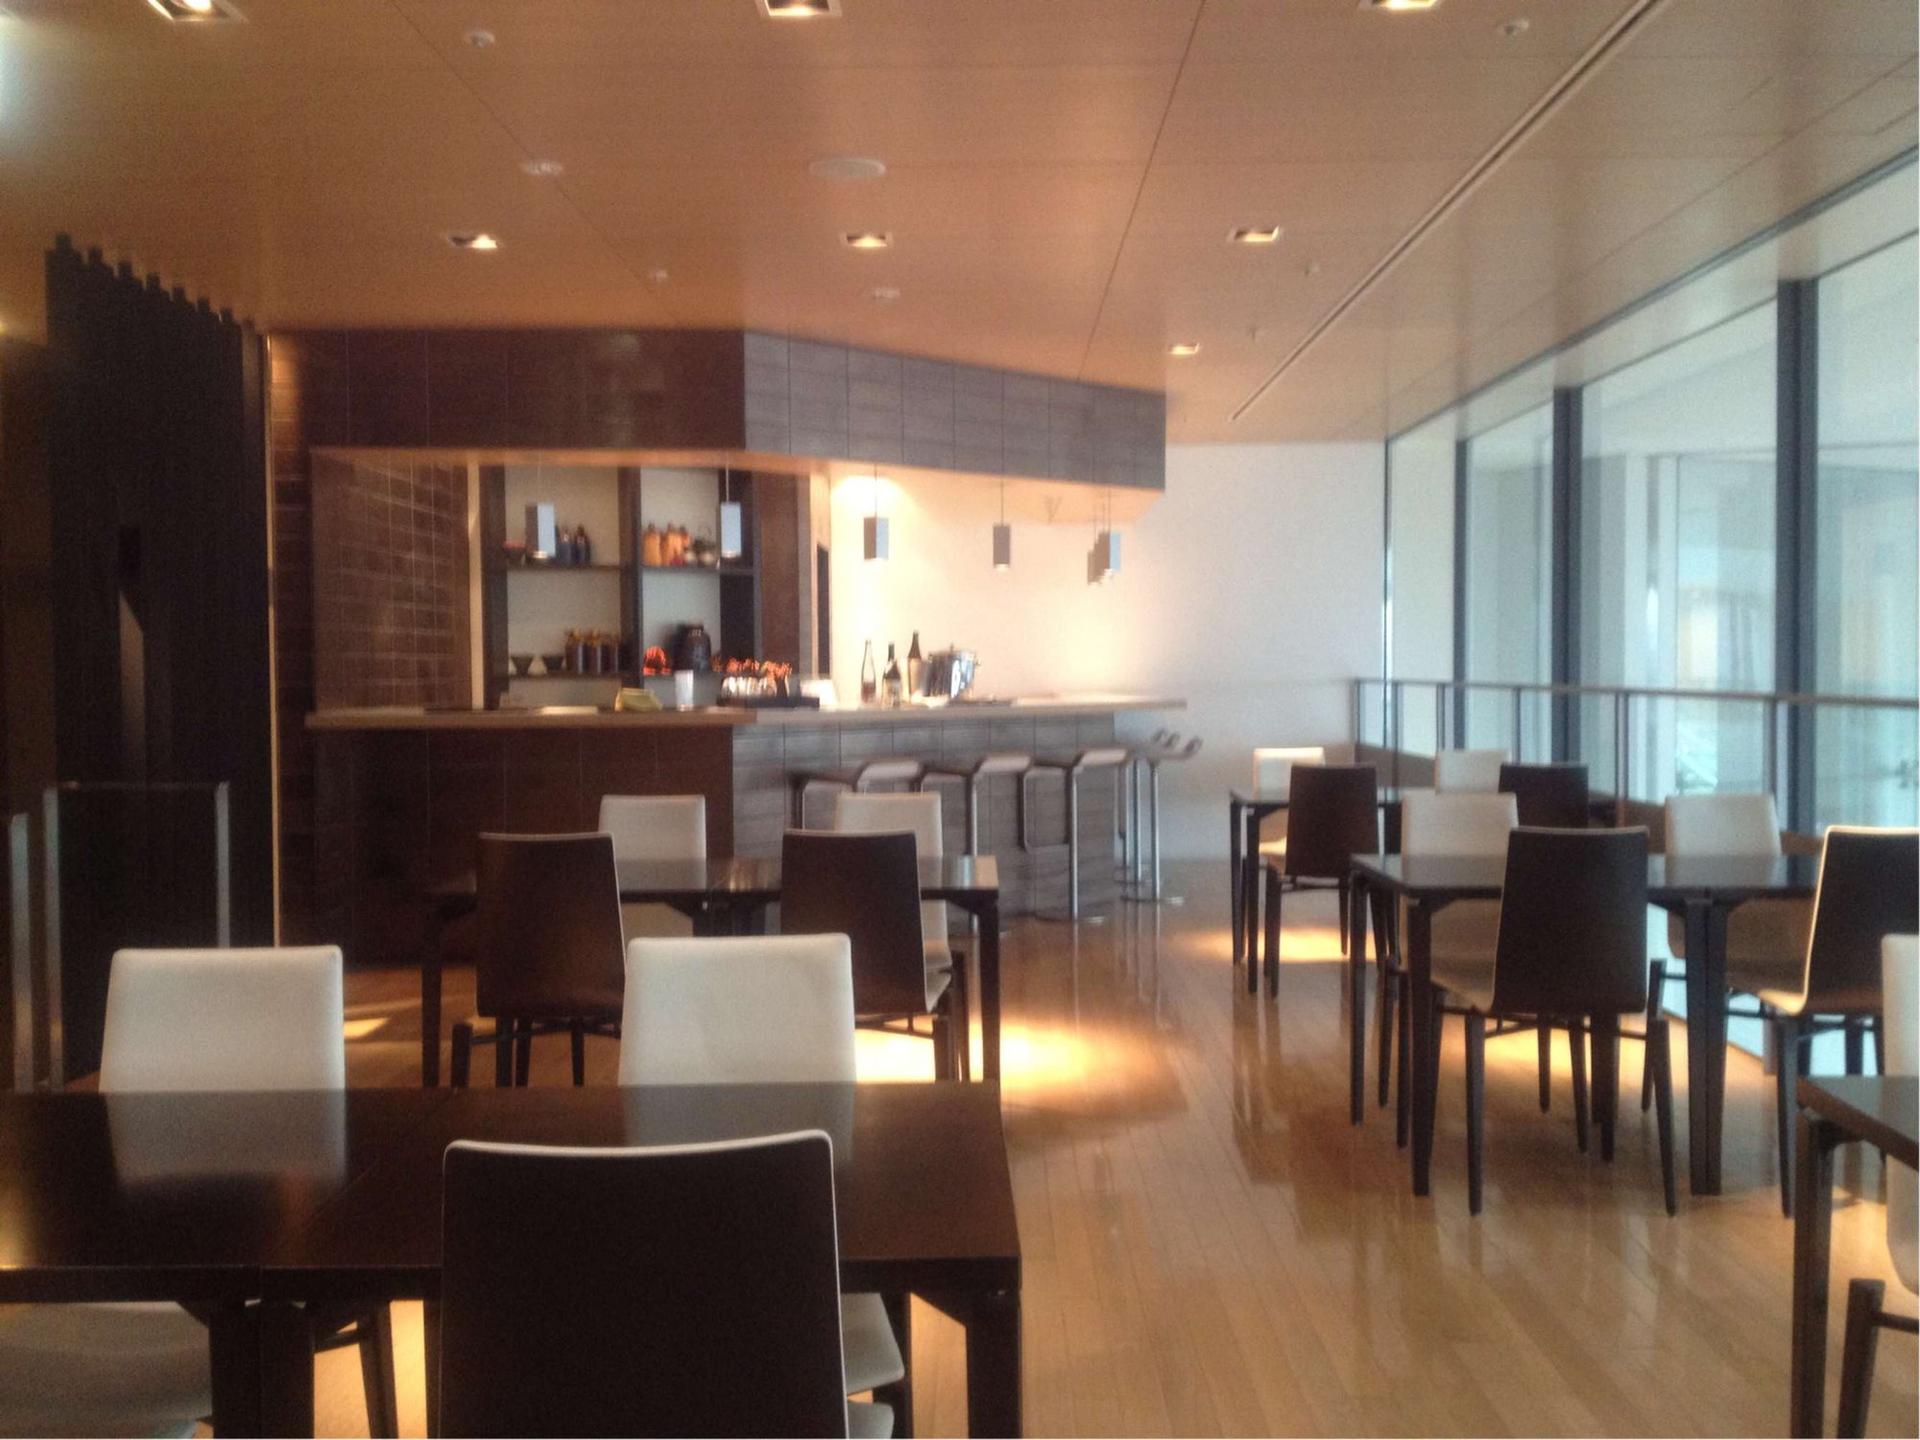 All Nippon Airways ANA Lounge image 2 of 39